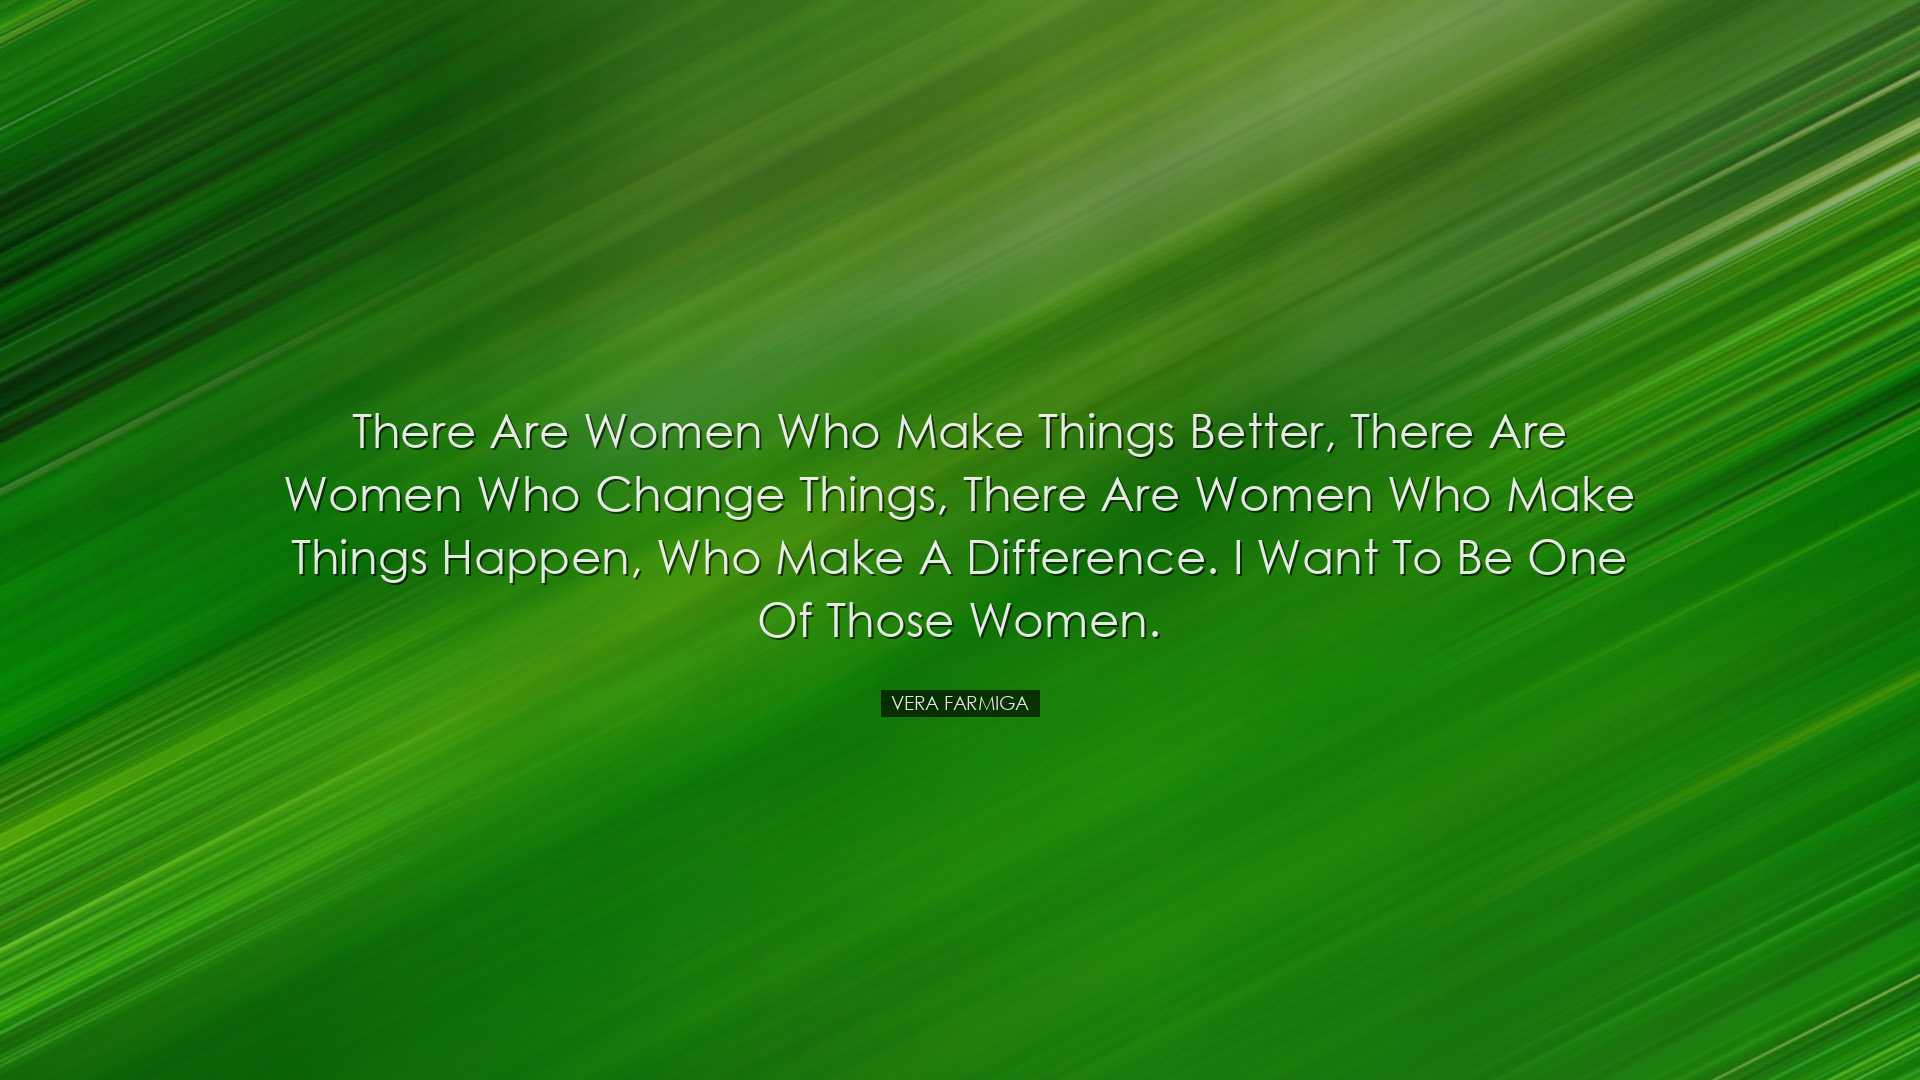 There are women who make things better, there are women who change